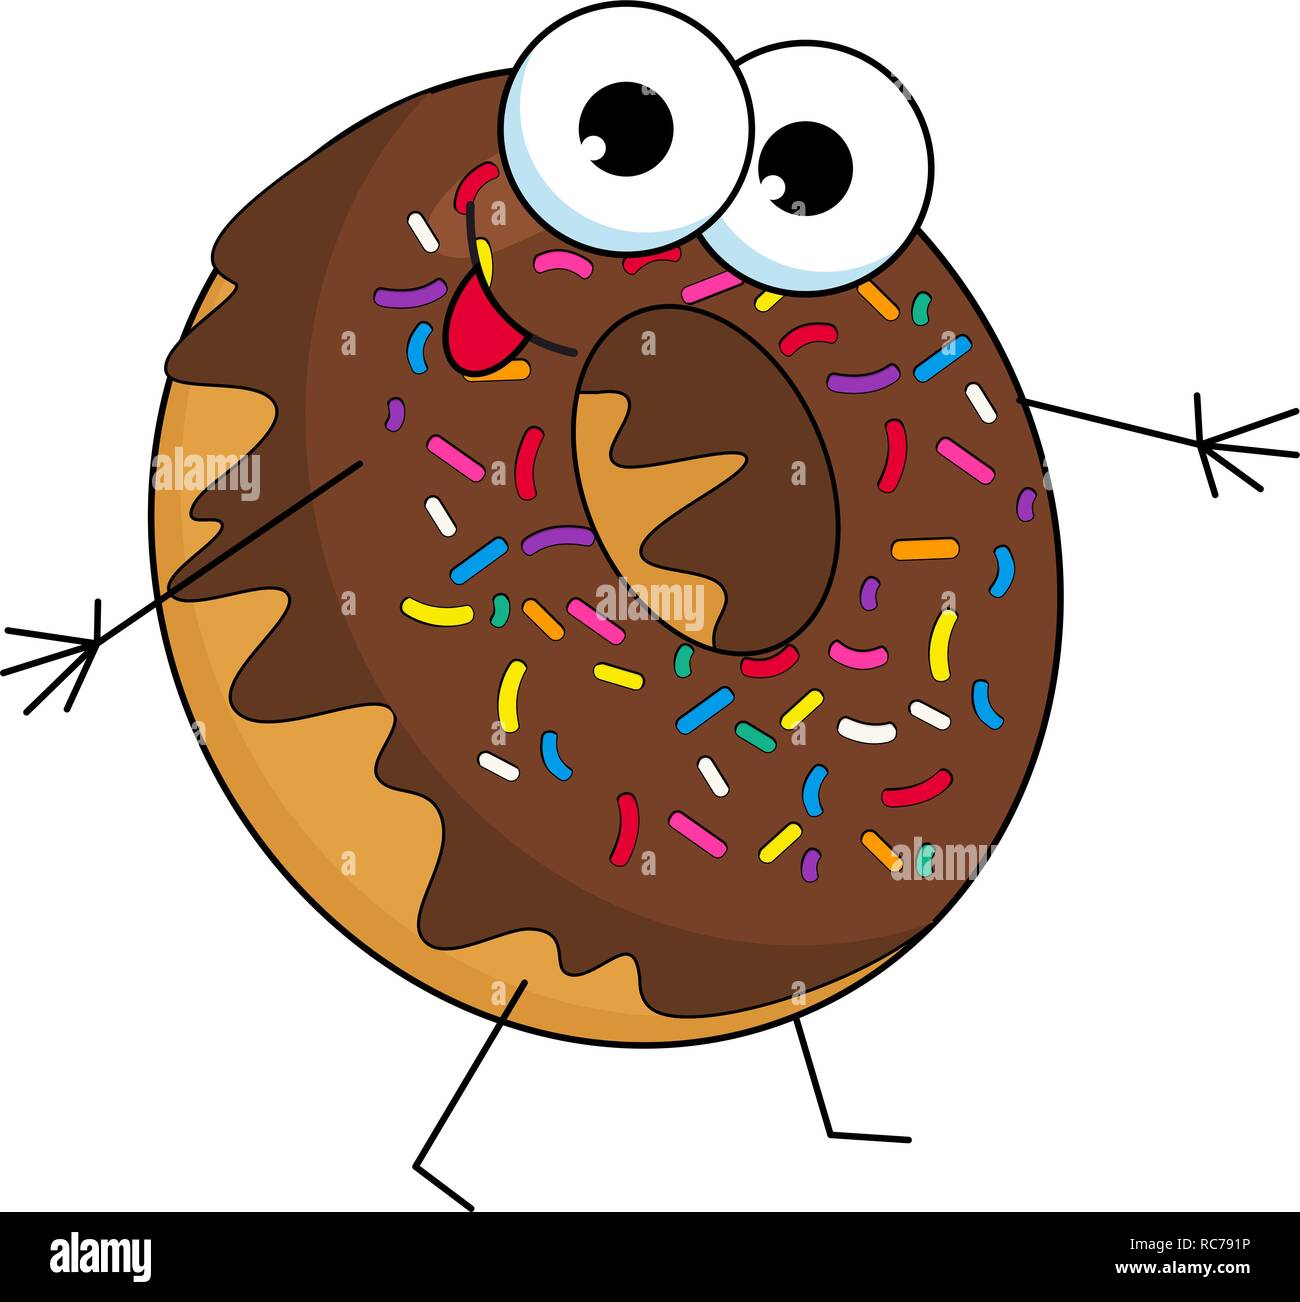 Funny donut character with chocolate, cartoon style Raster illustration isolated on white background. Donut character with eyes, hands and legs Stock Photo